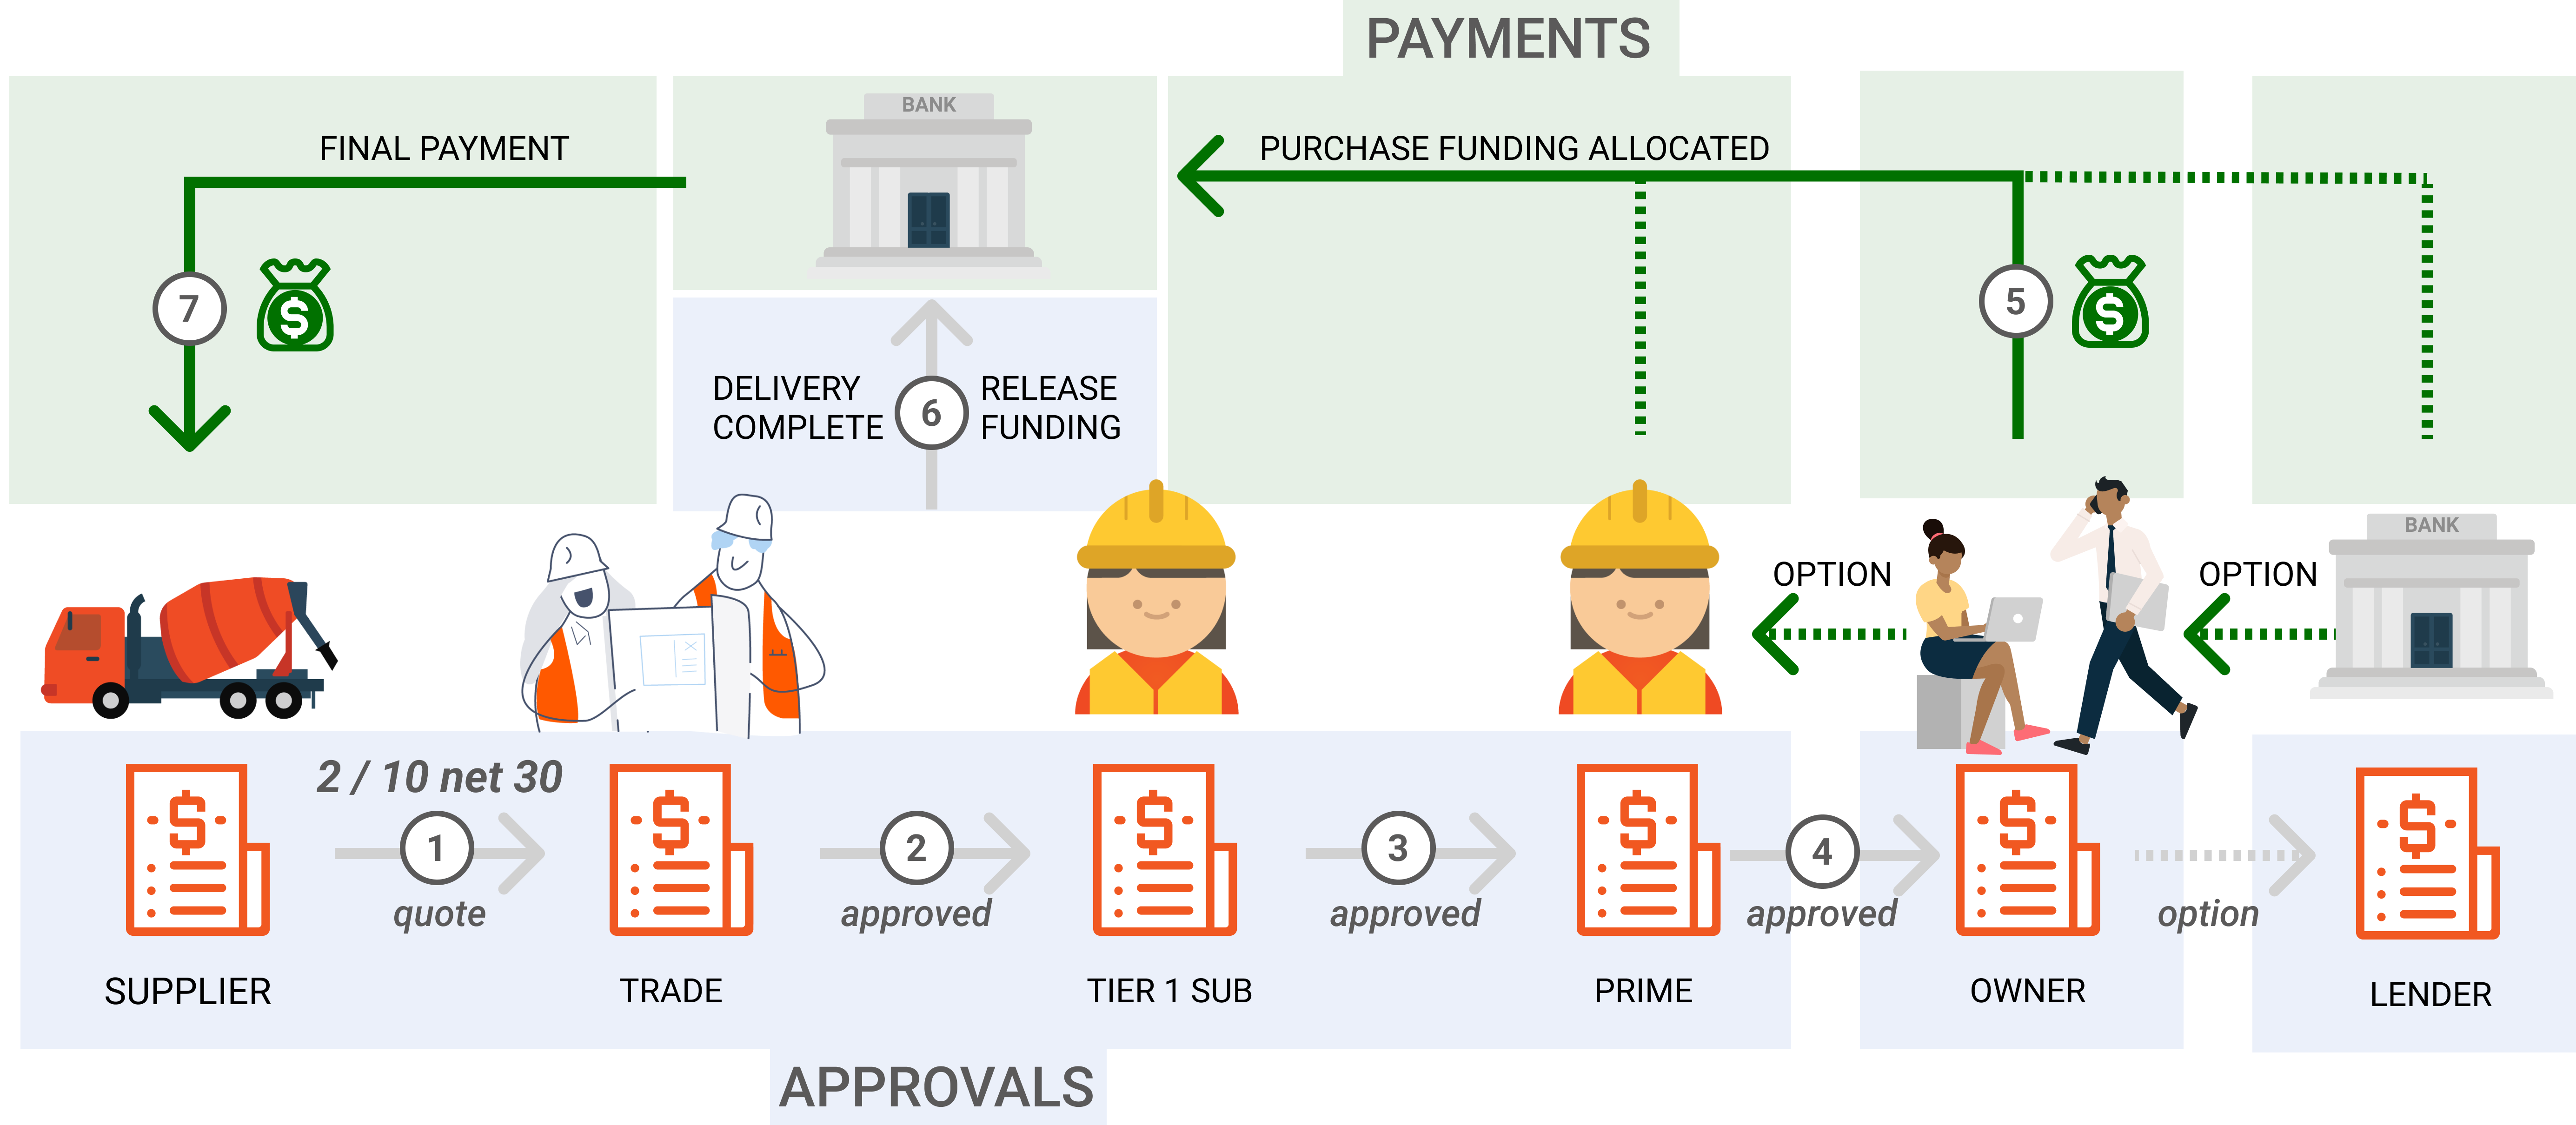 The cash flow requirements are filled by upstream team members such as the GC, Lender, or developer with direct and real-time payments to the value-chain endpoint such as the frontline sub or materials supplier